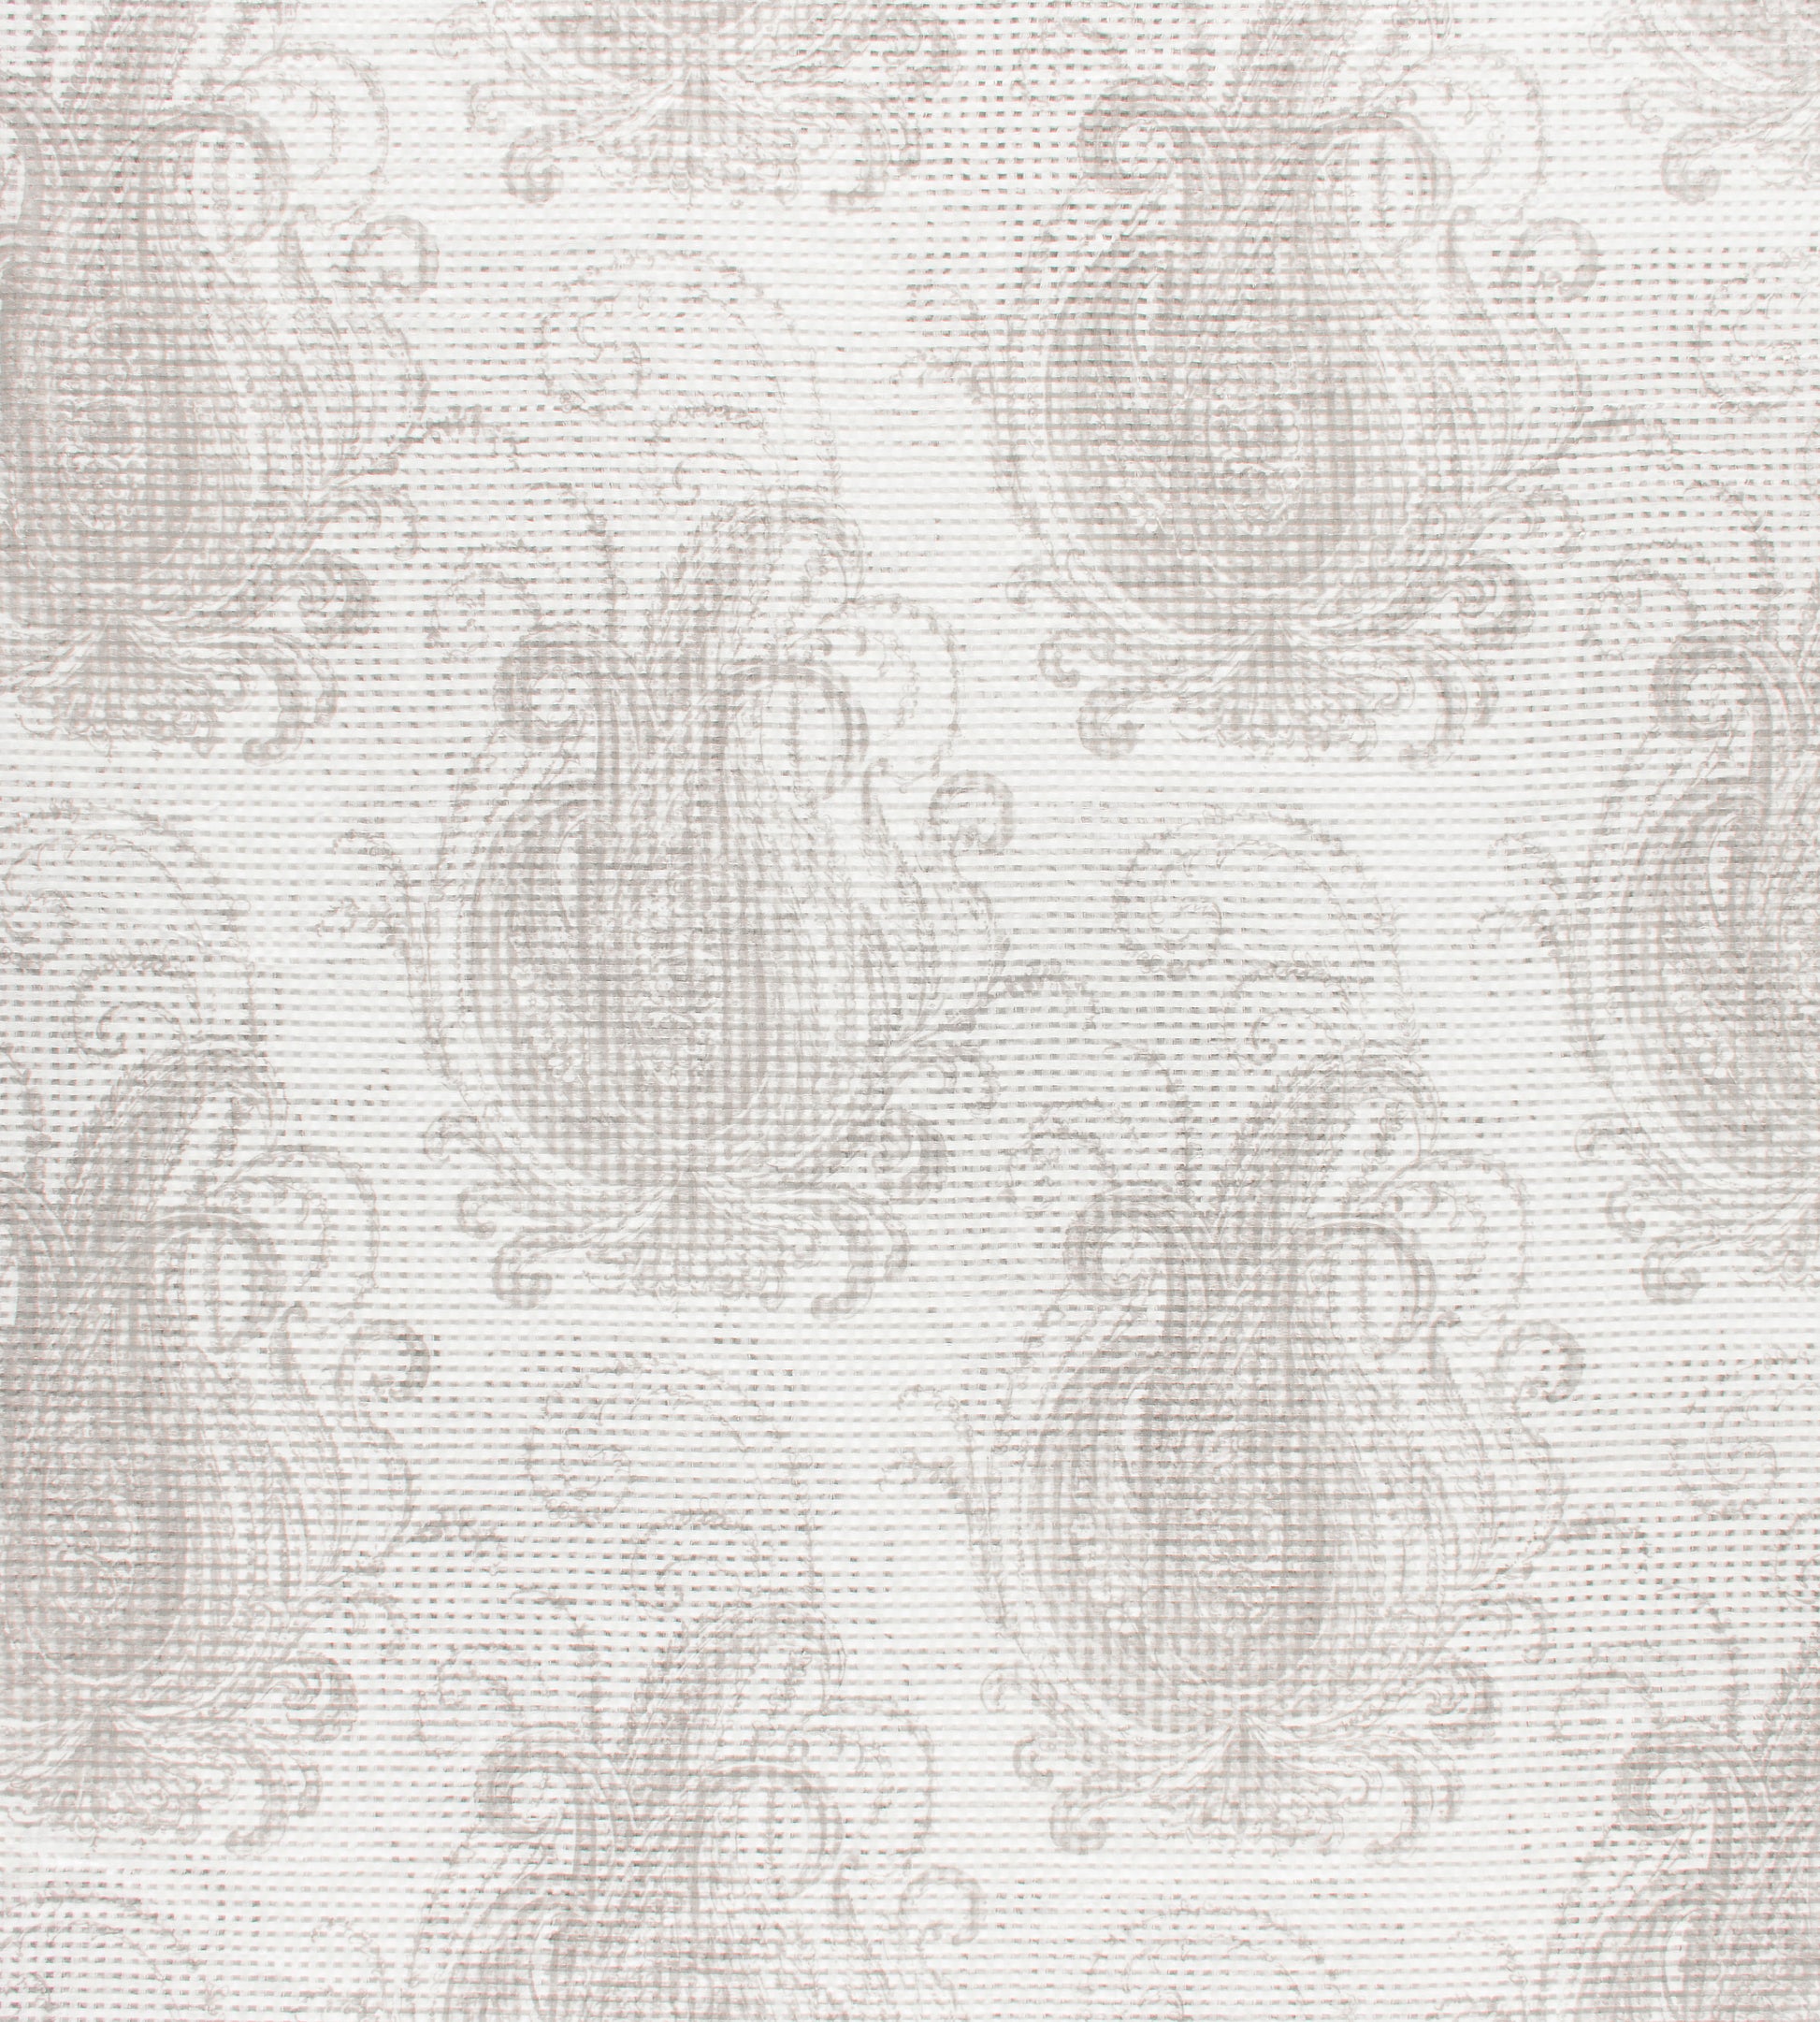 Purchase Old World Weavers Fabric Pattern number EQ 0001LAVE, Rubato Sheer Pearl 1